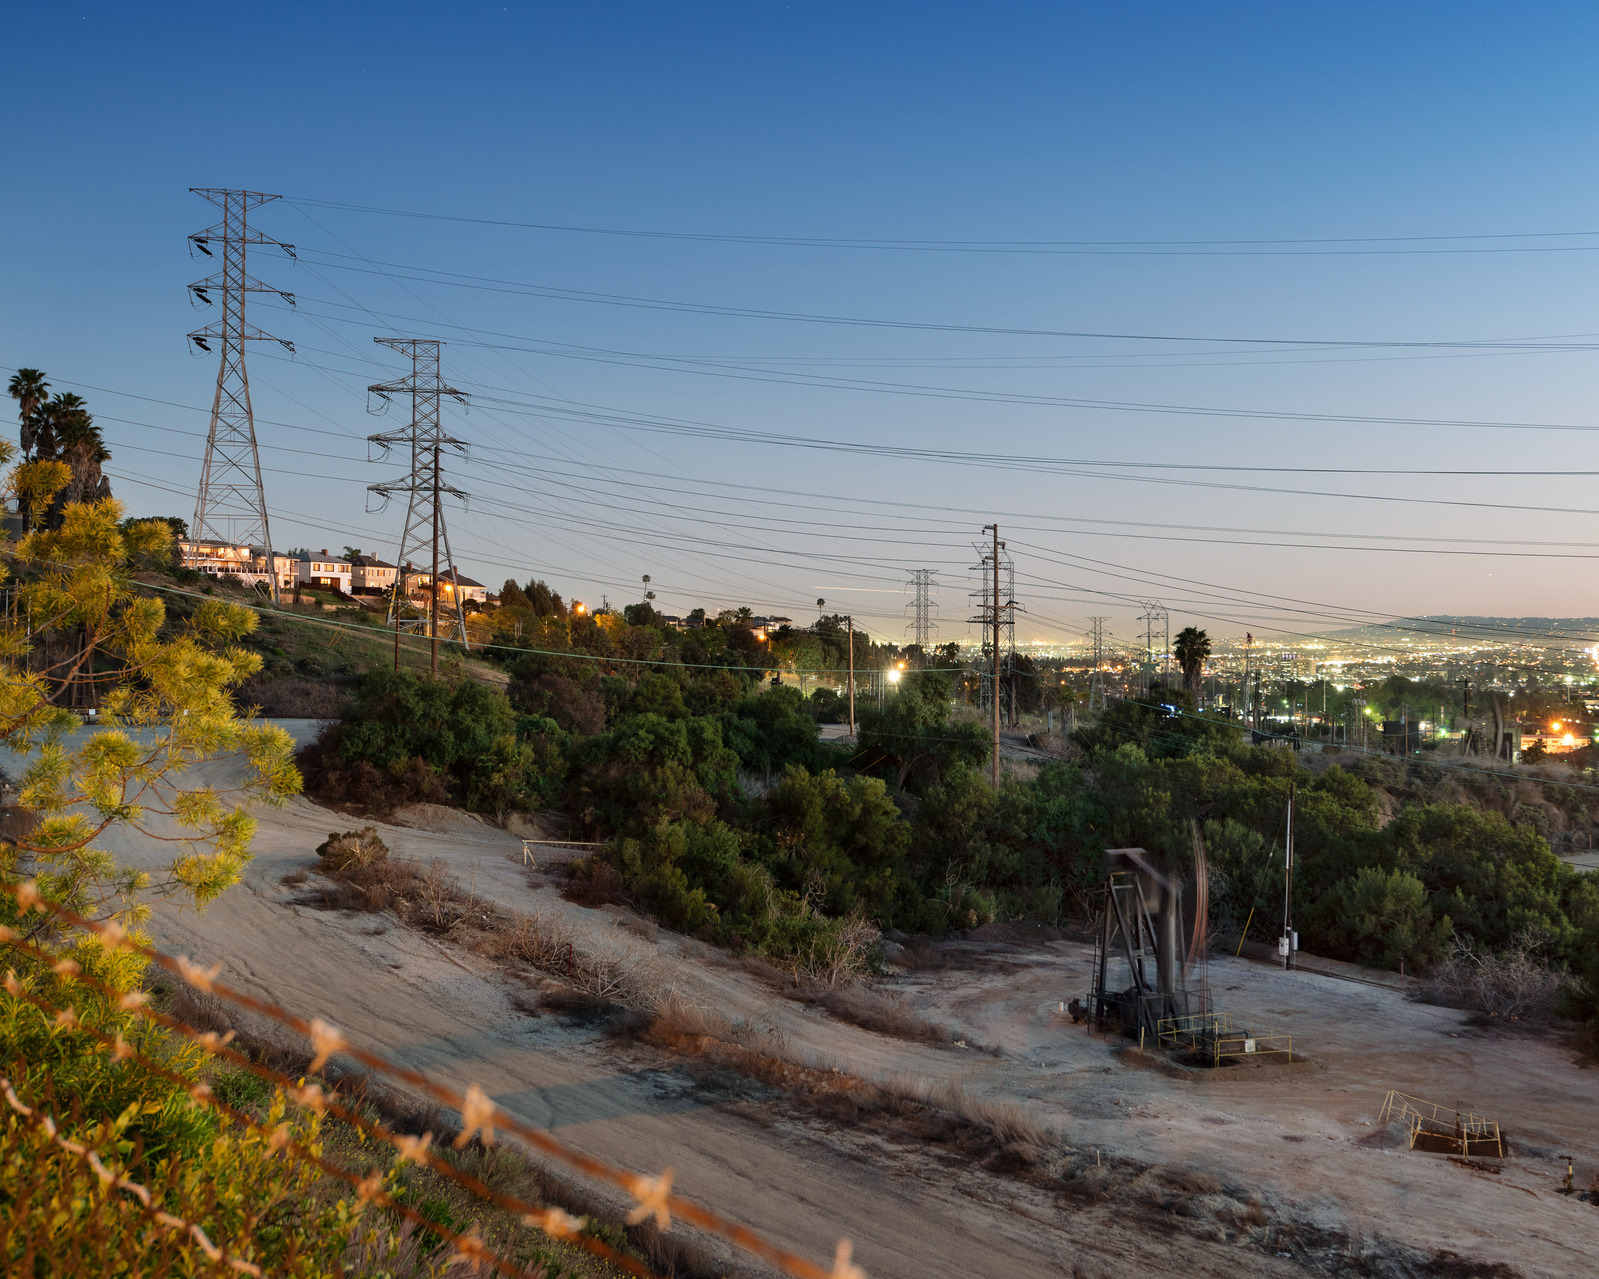 The End of Oil Drilling in L.A. / Photos by Paloma Dooley for The New Yorker